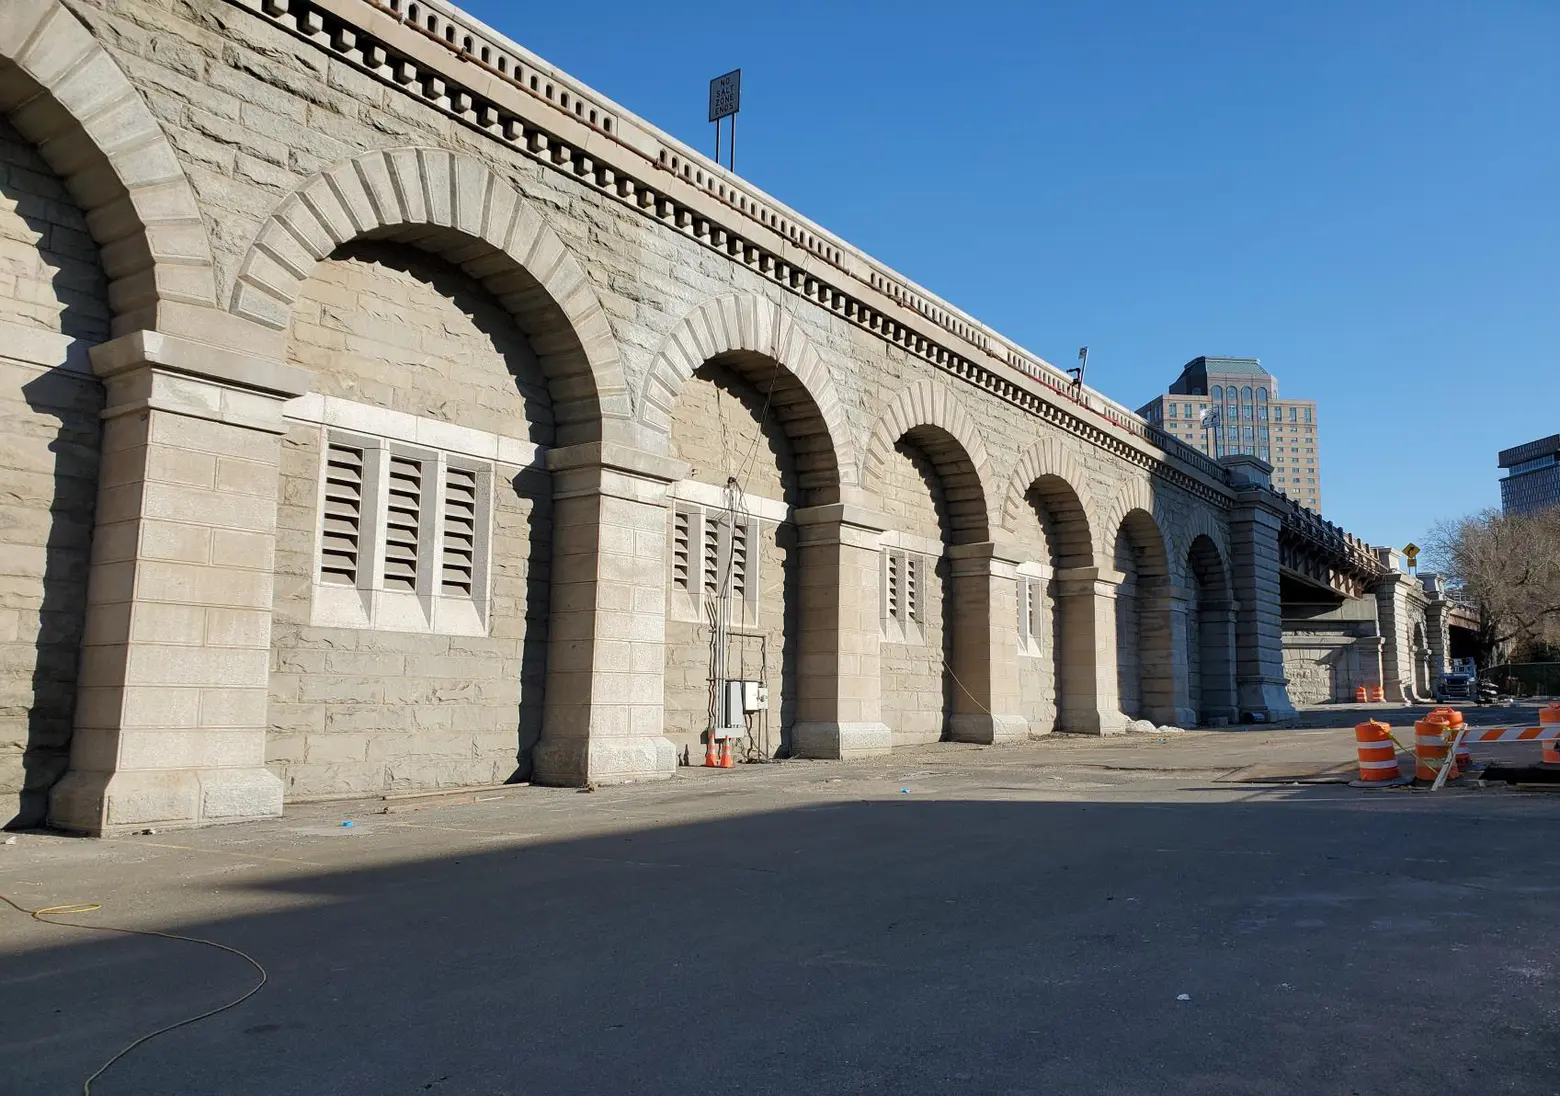 City seeks proposals for sports center at Brooklyn Bridge plaza in Dumbo